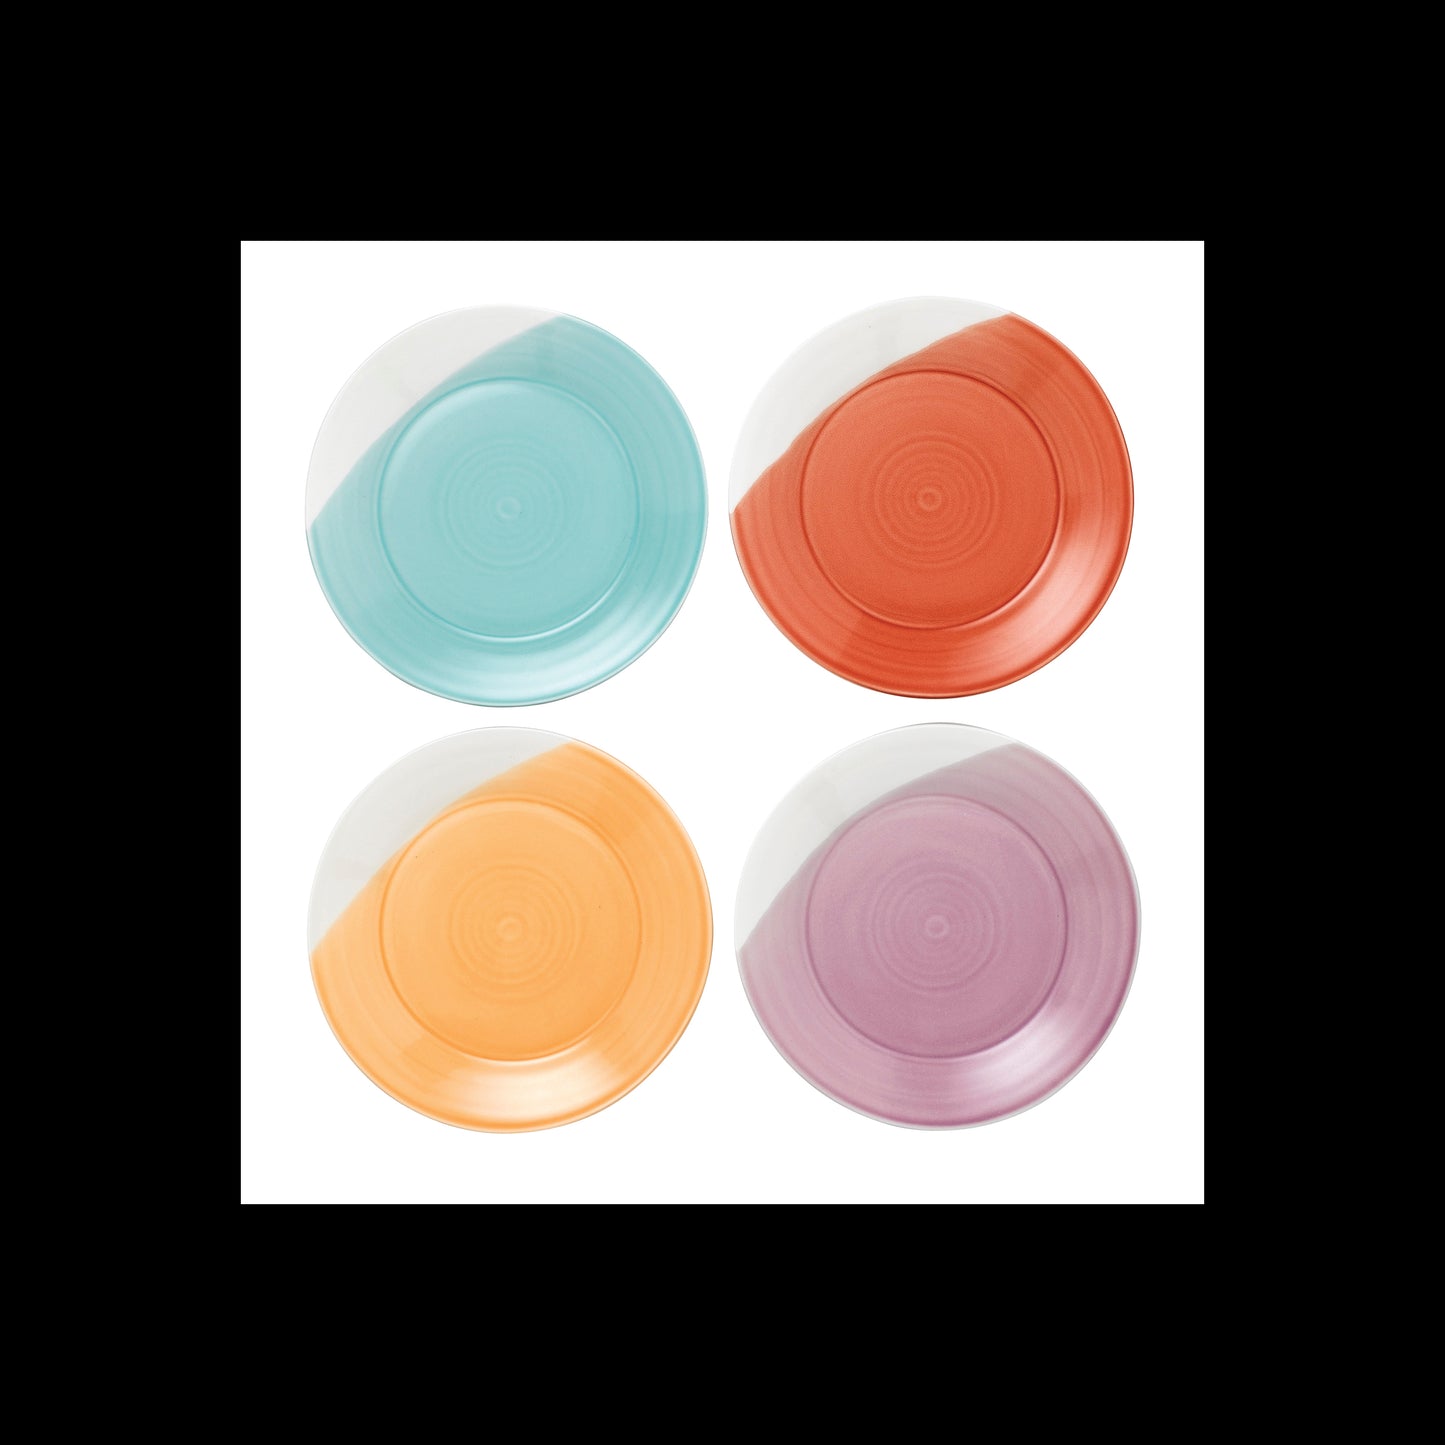 Royal Doulton 1815 Brights Plate 11.4 Inch, Set of 4